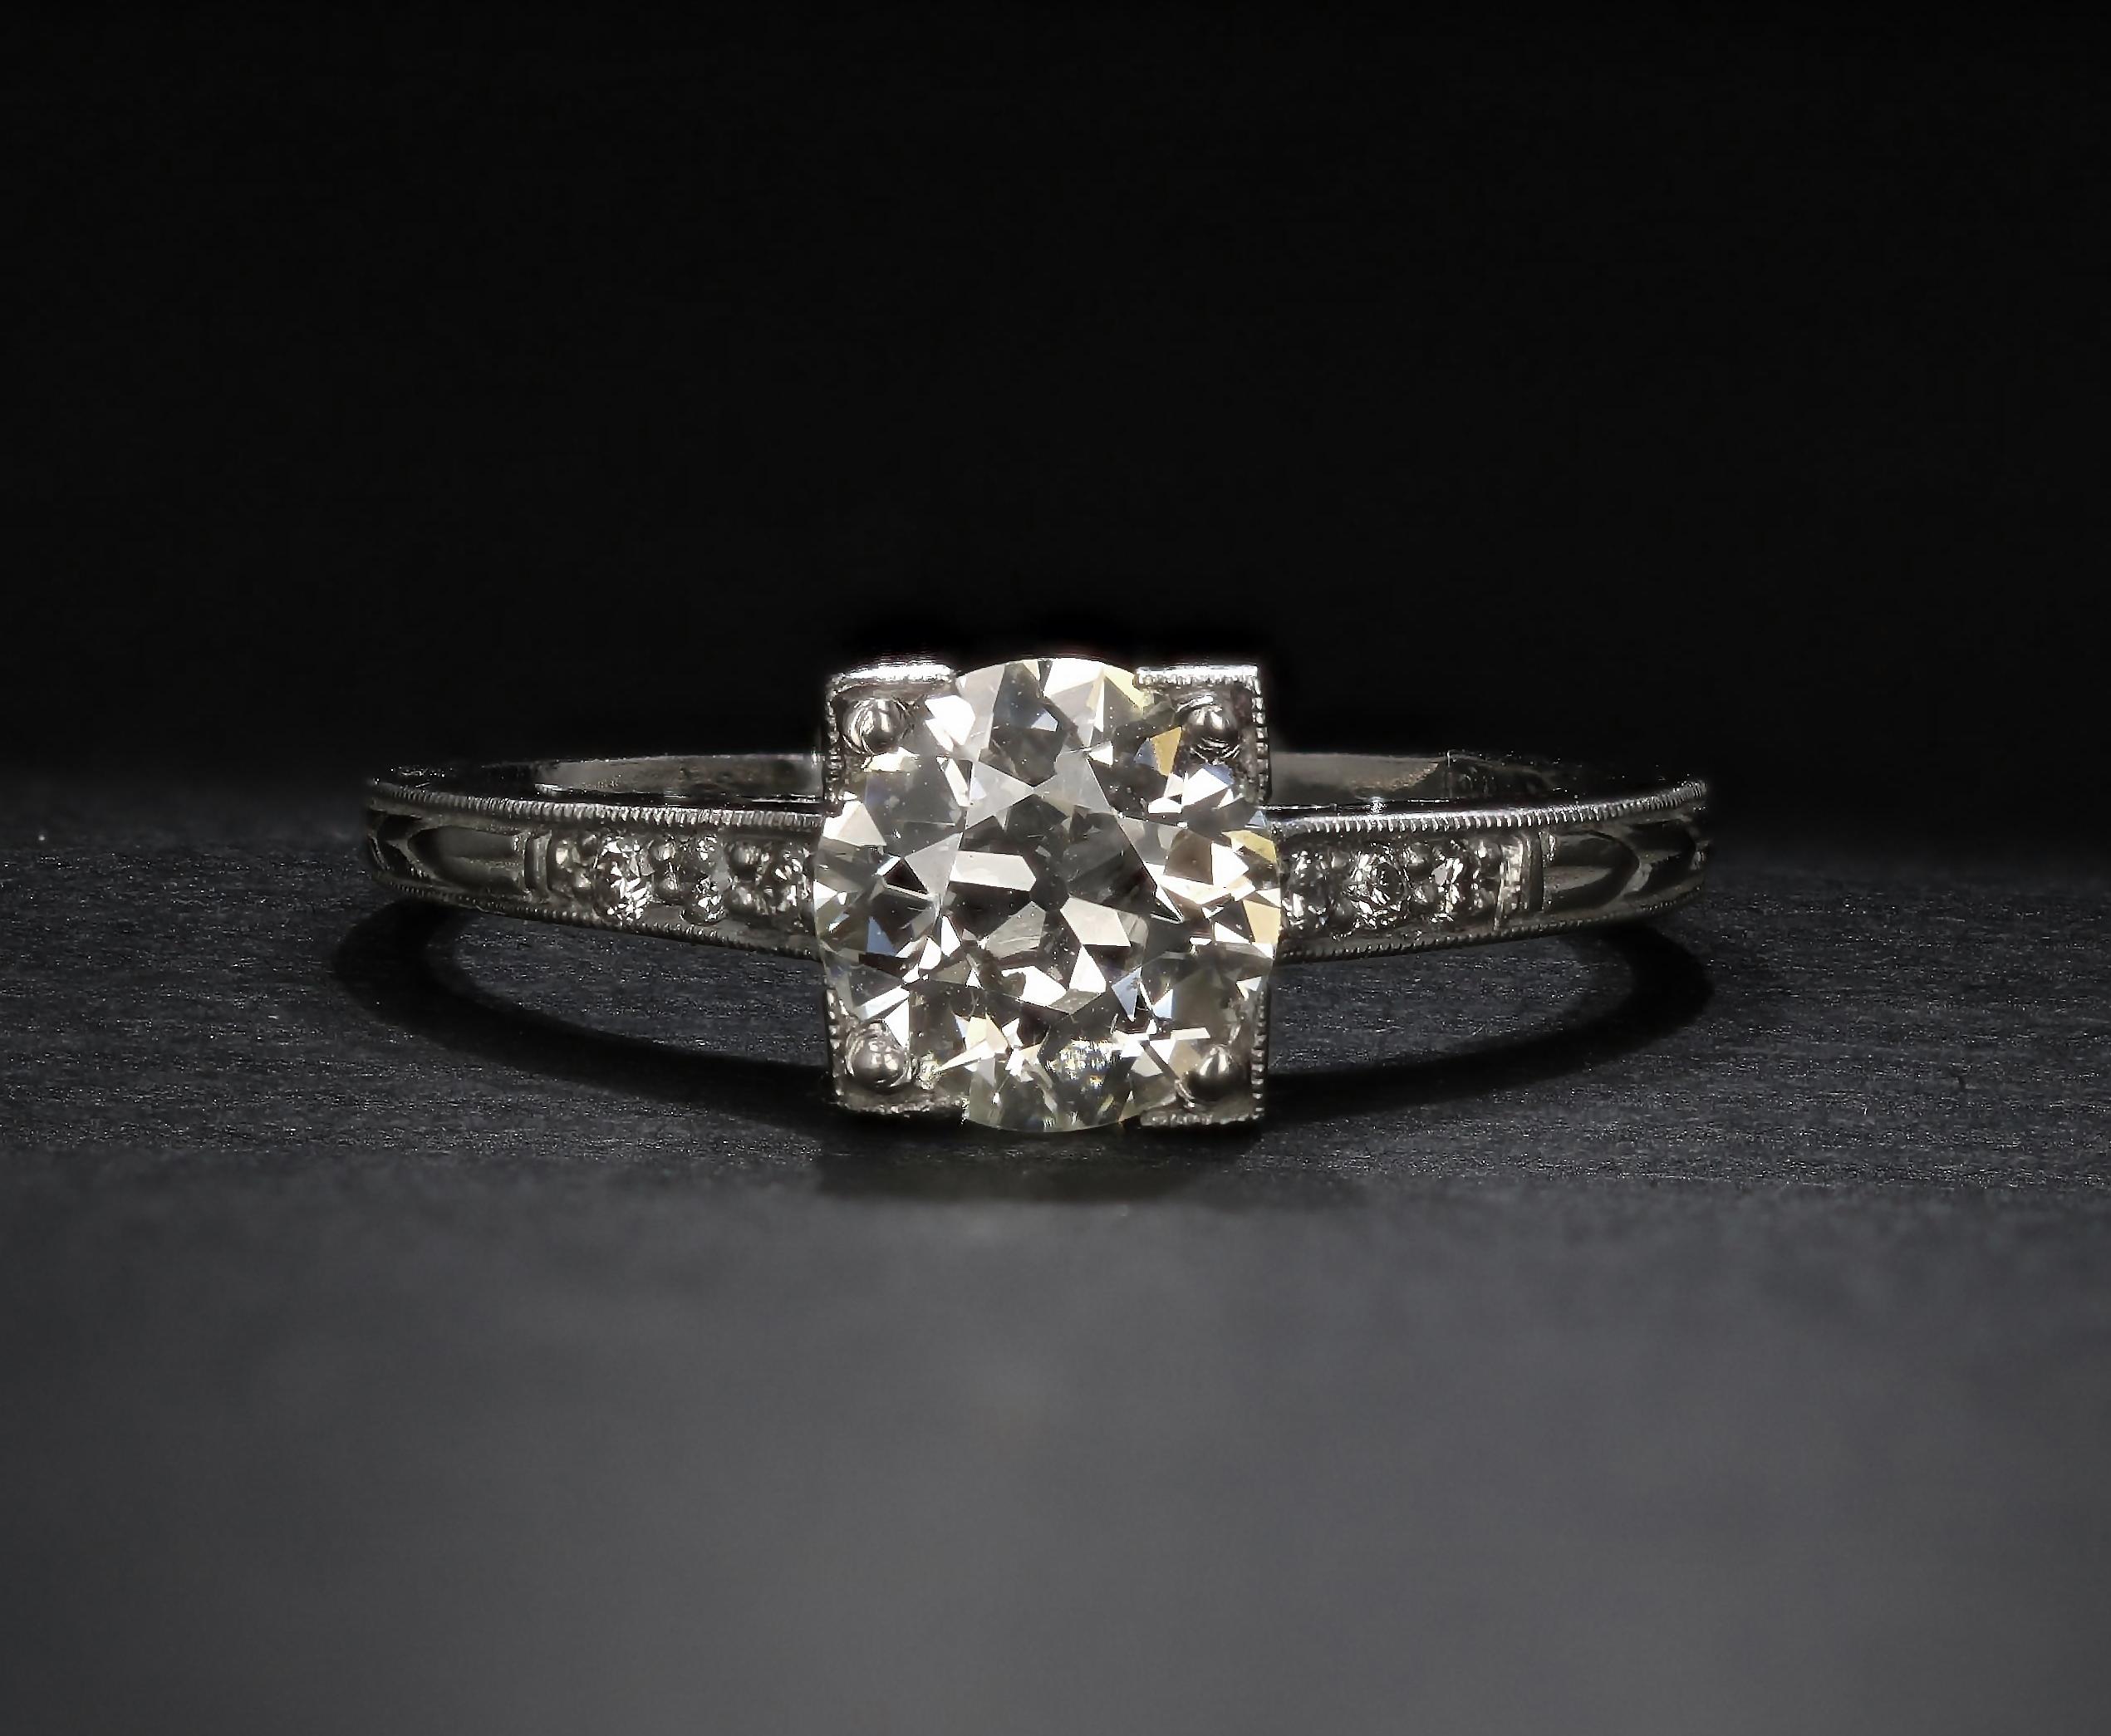 In the center of this estate diamond engagement ring is an Old European diamond of more than one carat. The ring is crafted in platinum and features fine engraving on the shank. A half dozen smaller round diamonds accent the ring's sides. 

DIAMOND